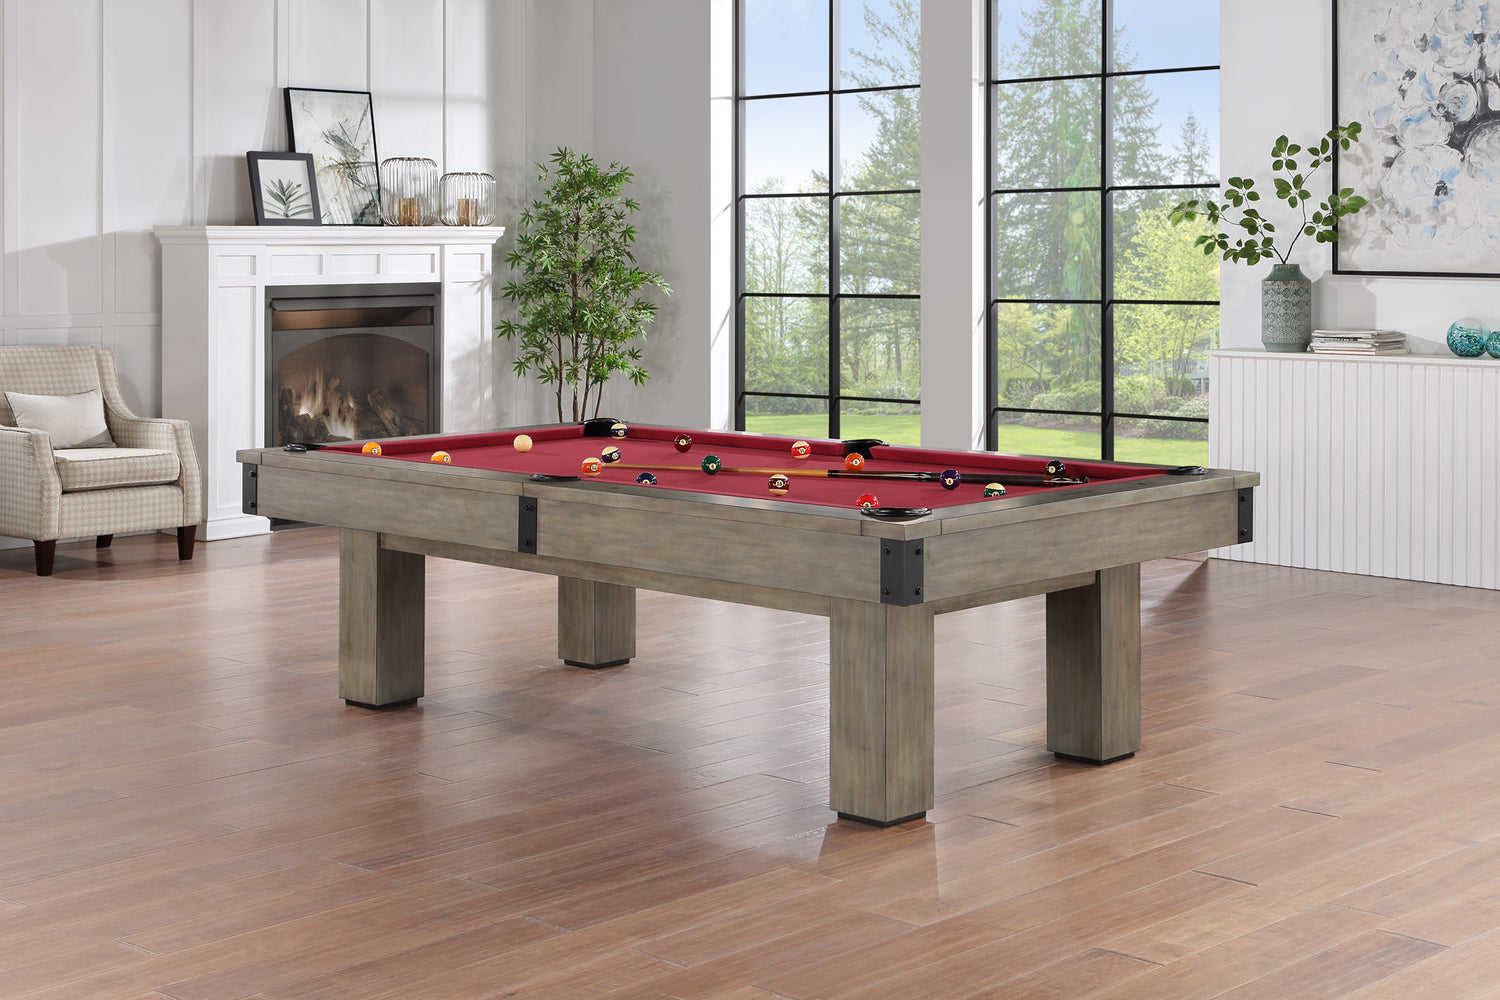 Legacy Billiards Colt II Pool Table in Overcast Finish with Legacy Red Cloth Modern Room Scene - Angle View